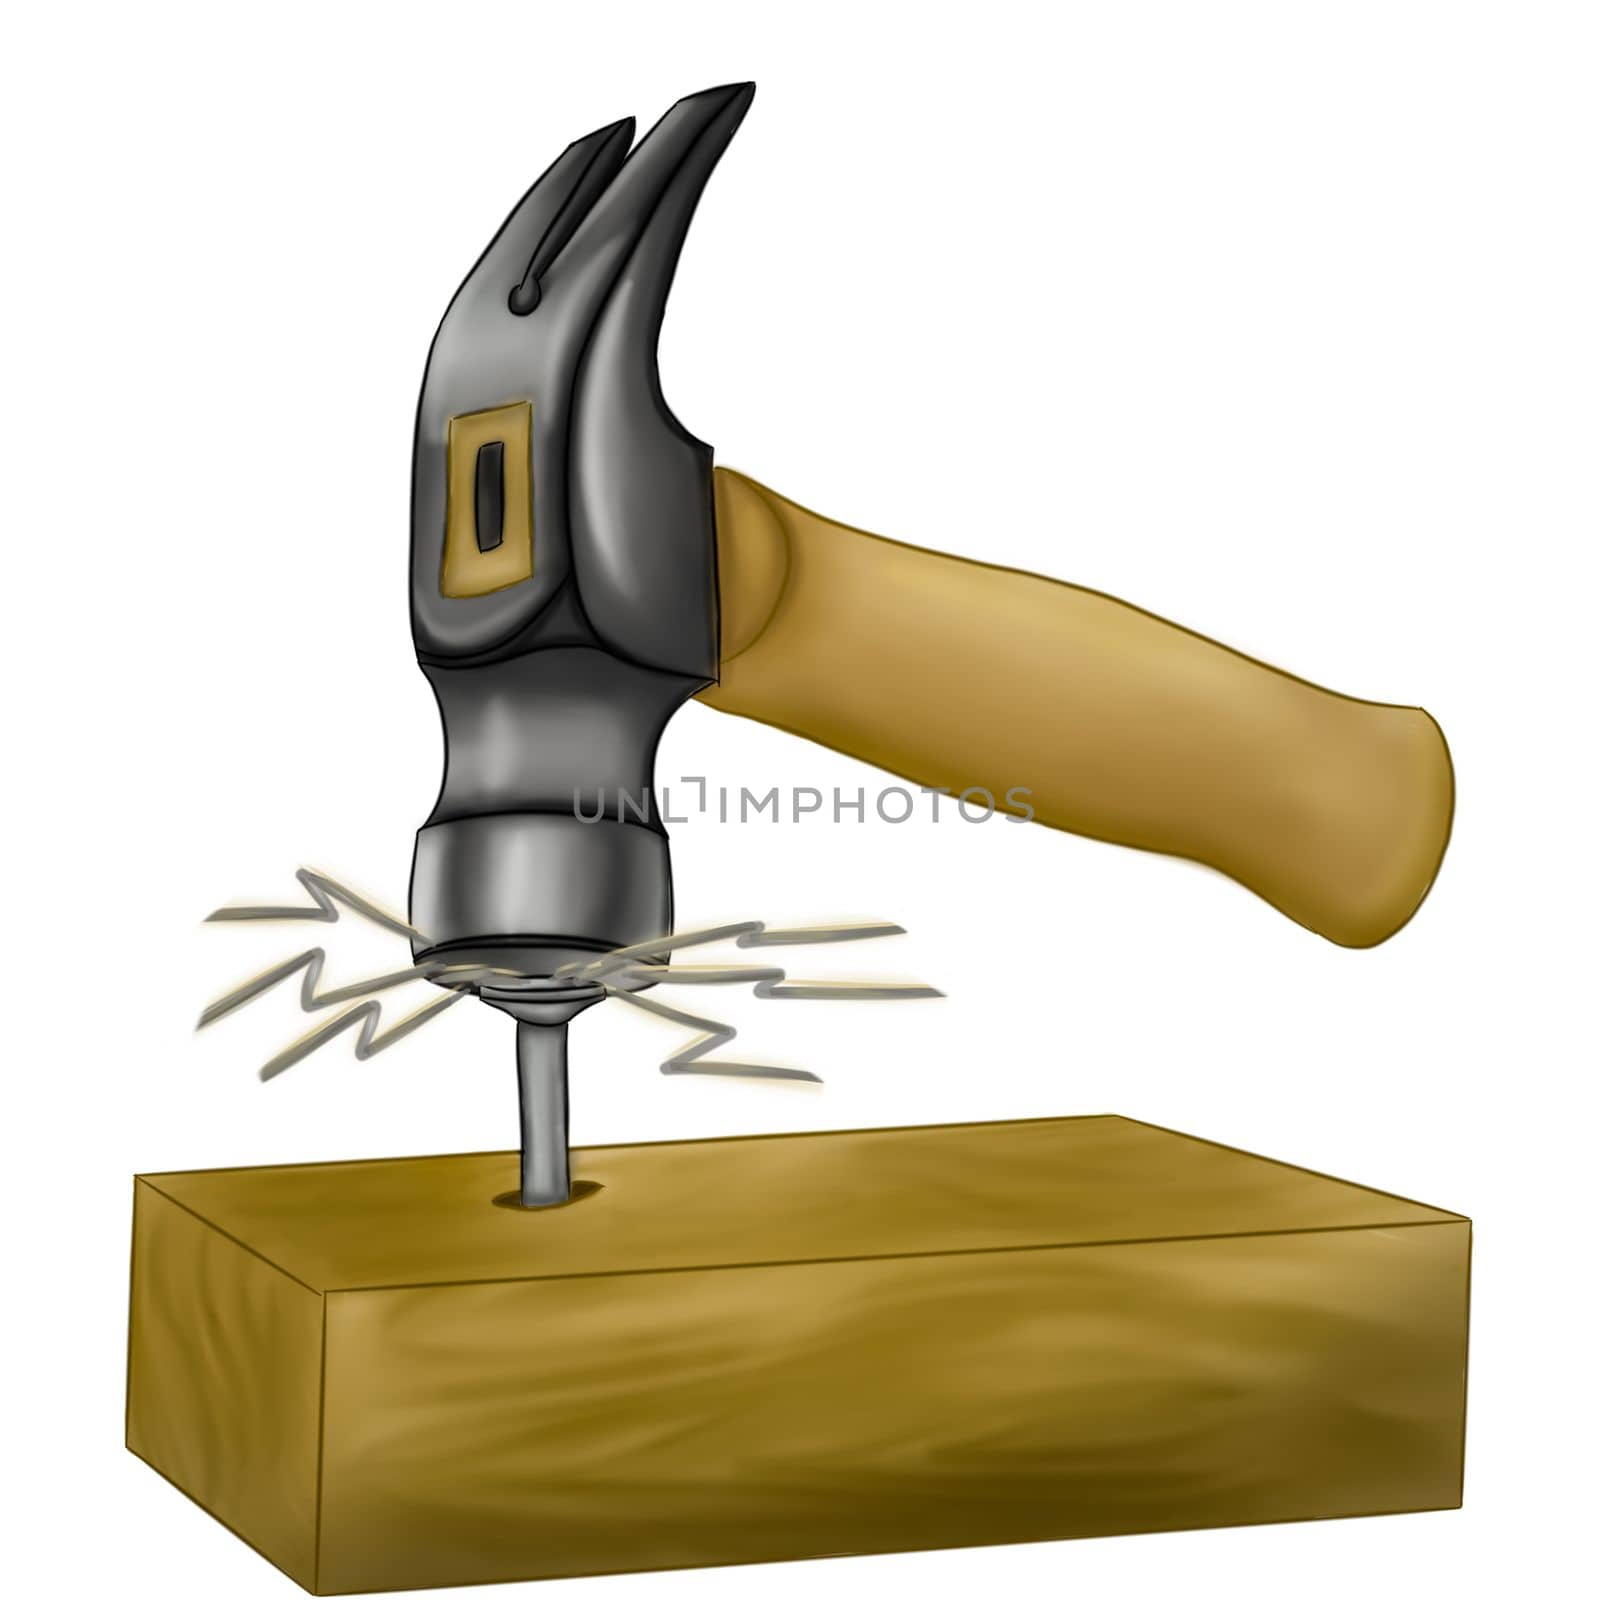 A hammer hammers a nail into a piece of wood on an isolated background. Clipart tools.  by Alina_Lebed